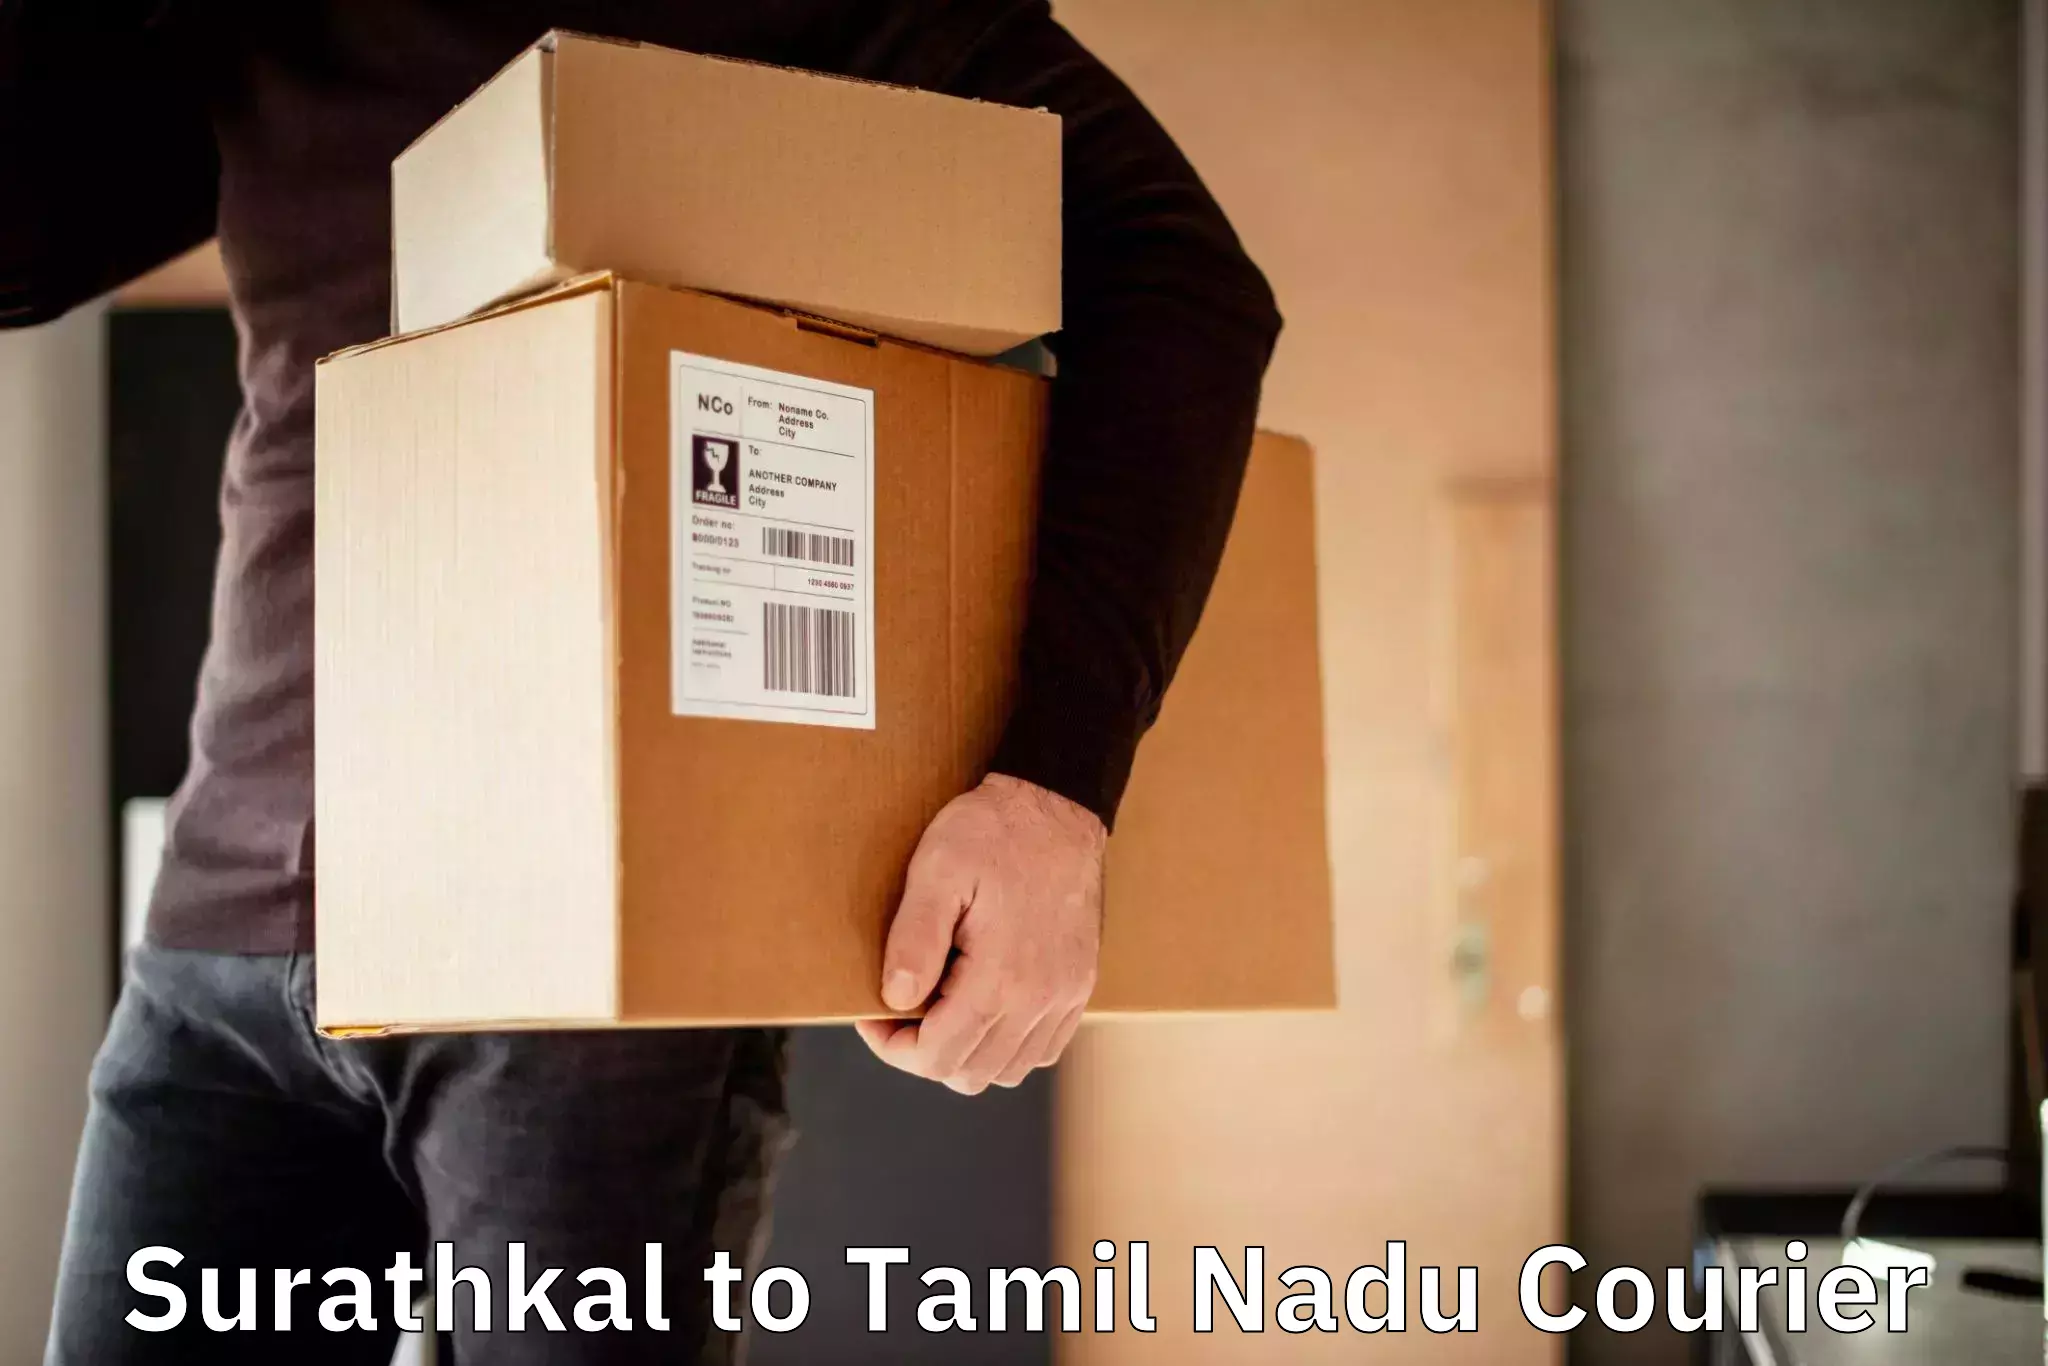 Nationwide shipping capabilities Surathkal to Tamil Nadu